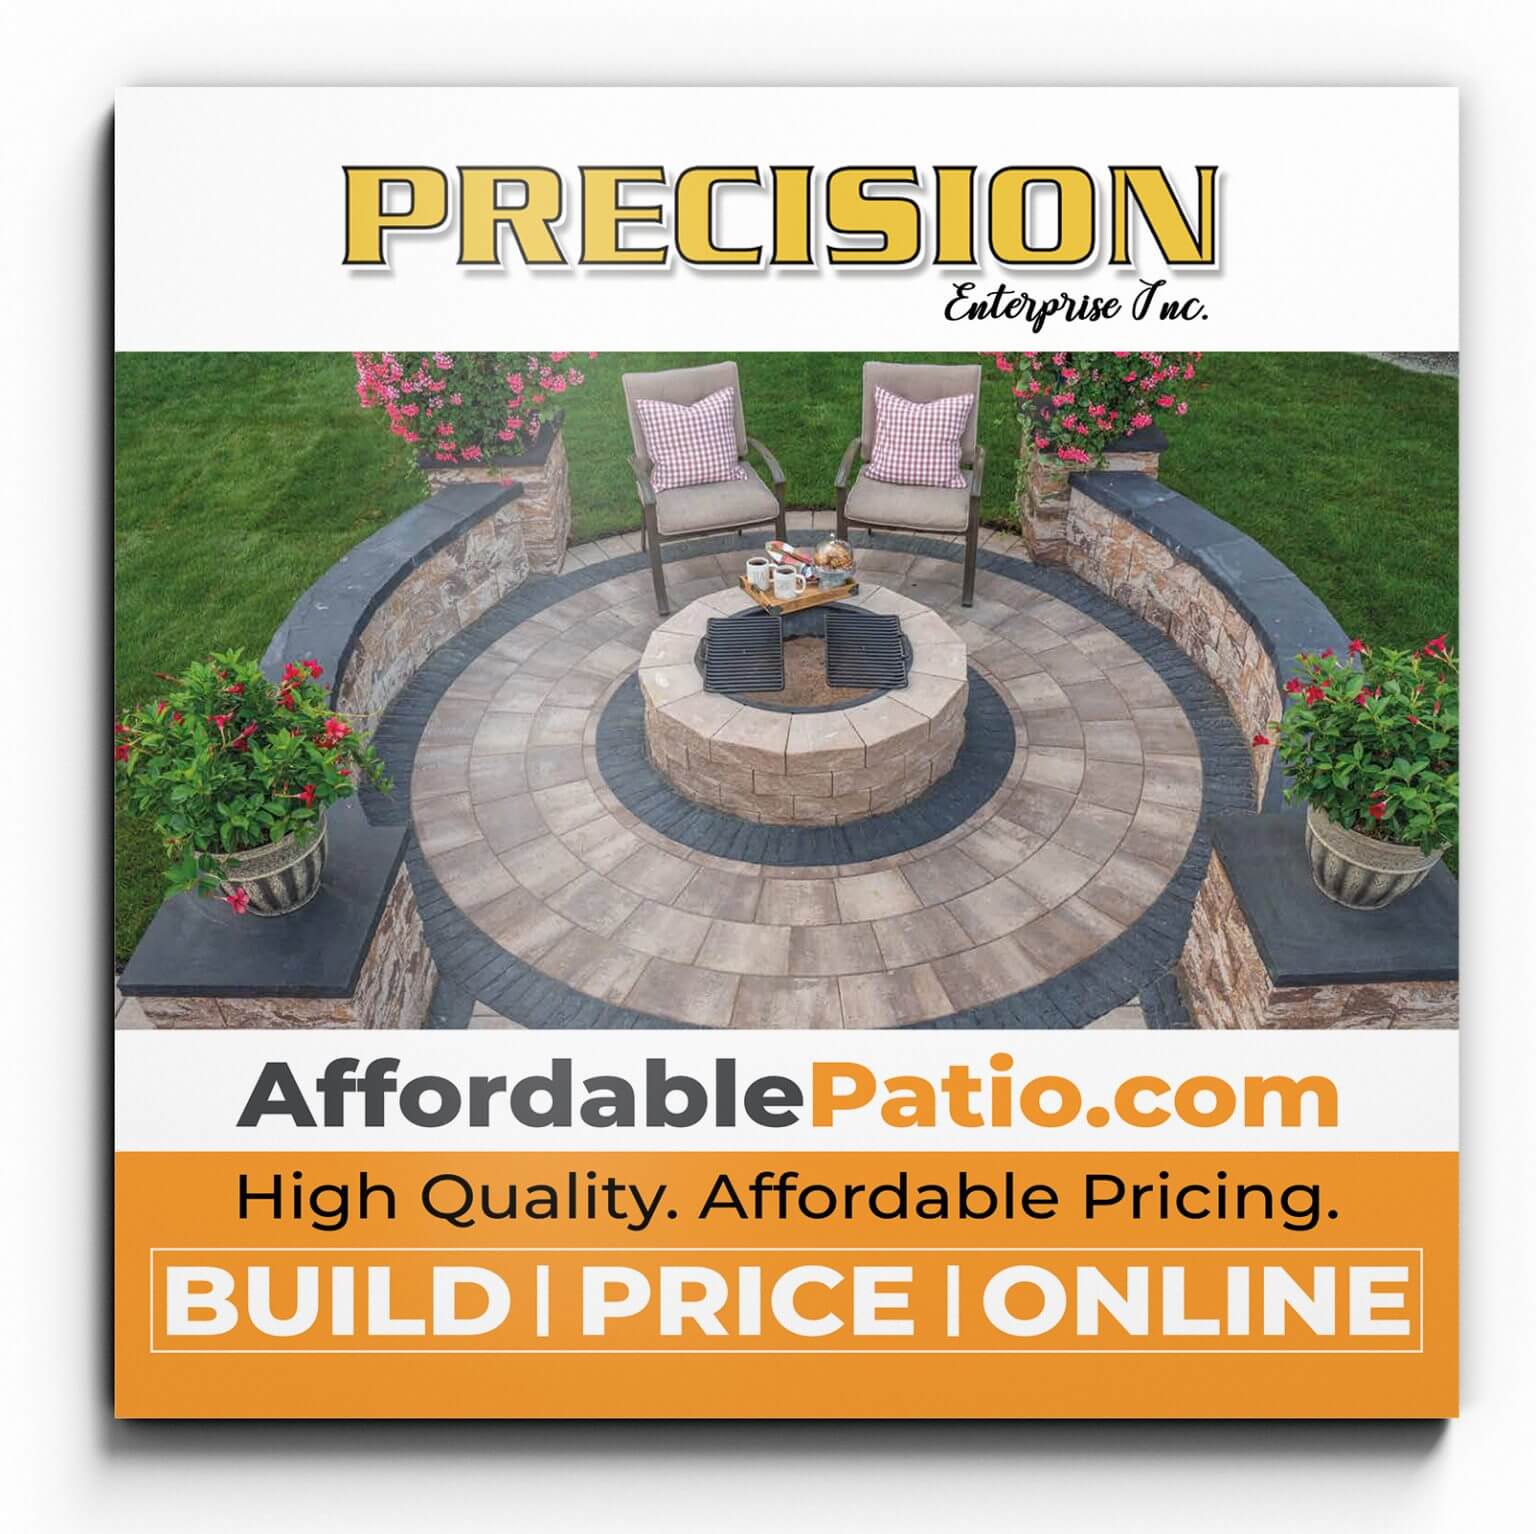 Affordable Patio Ebook-Catalog: Your Guide to Budget-Friendly Outdoor Living